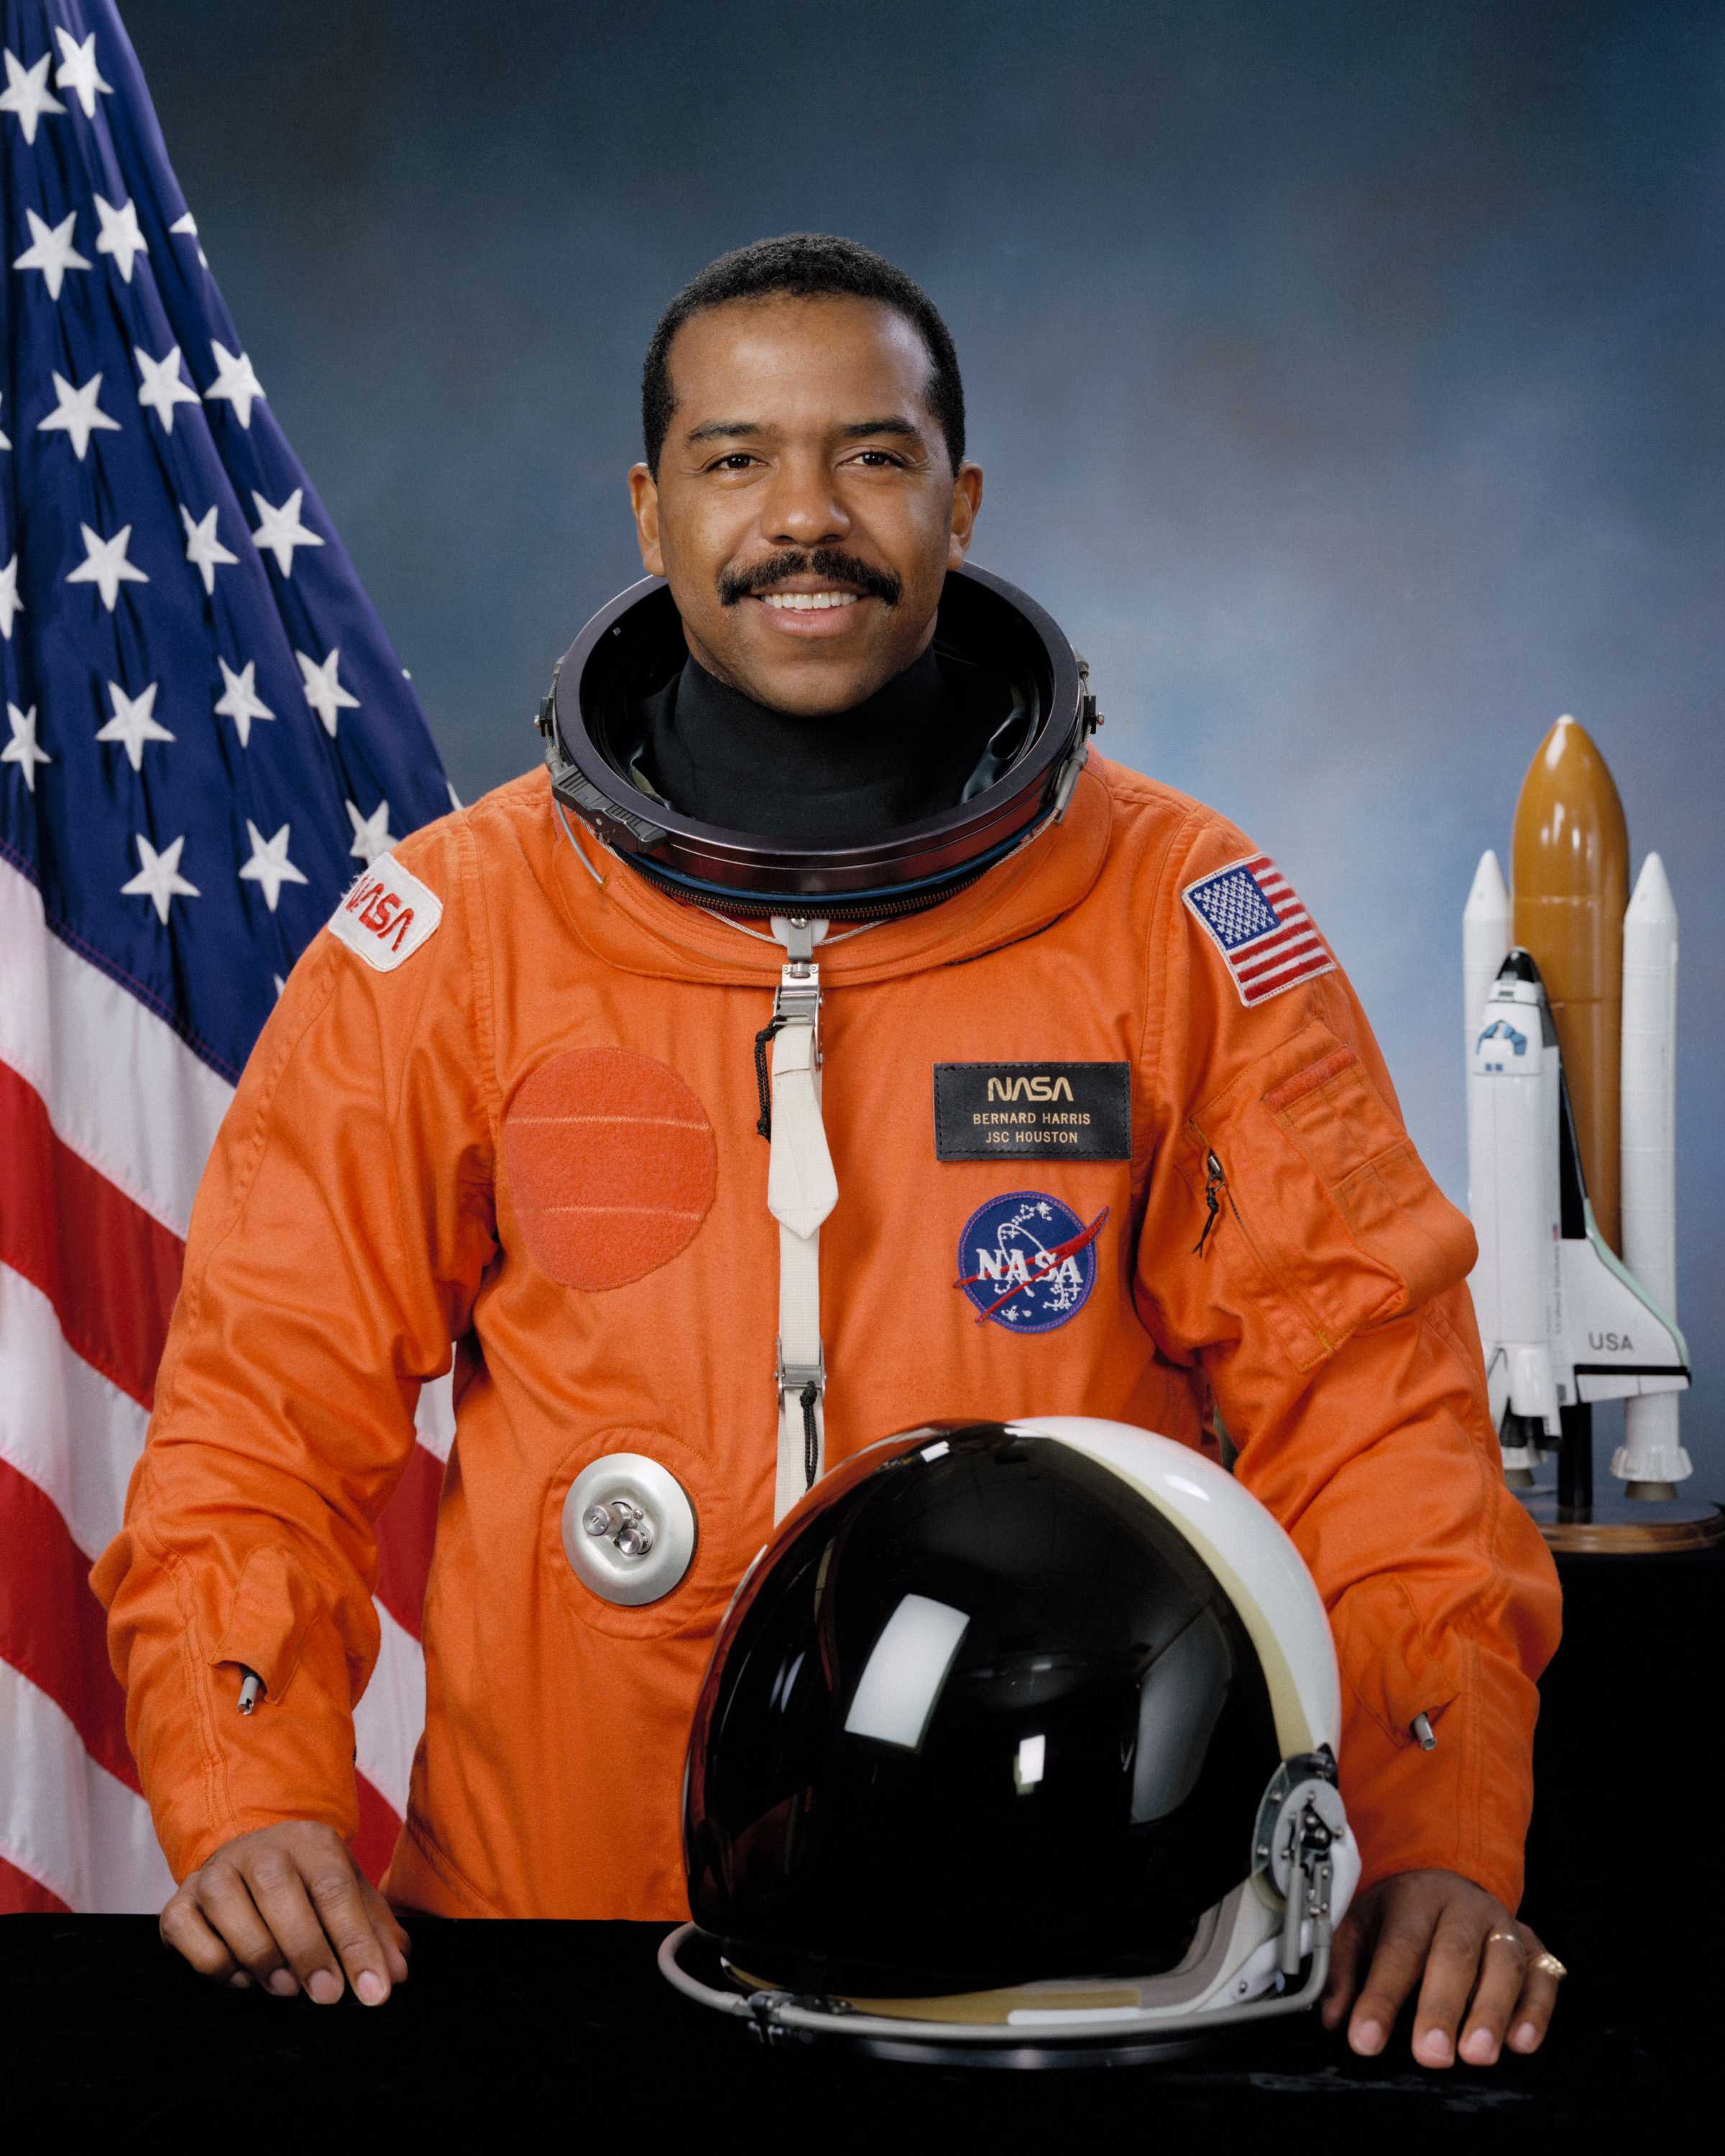 Harris is wearing an orange space suit with a helmet resting on the table in front of him while he smiles for his portrait.